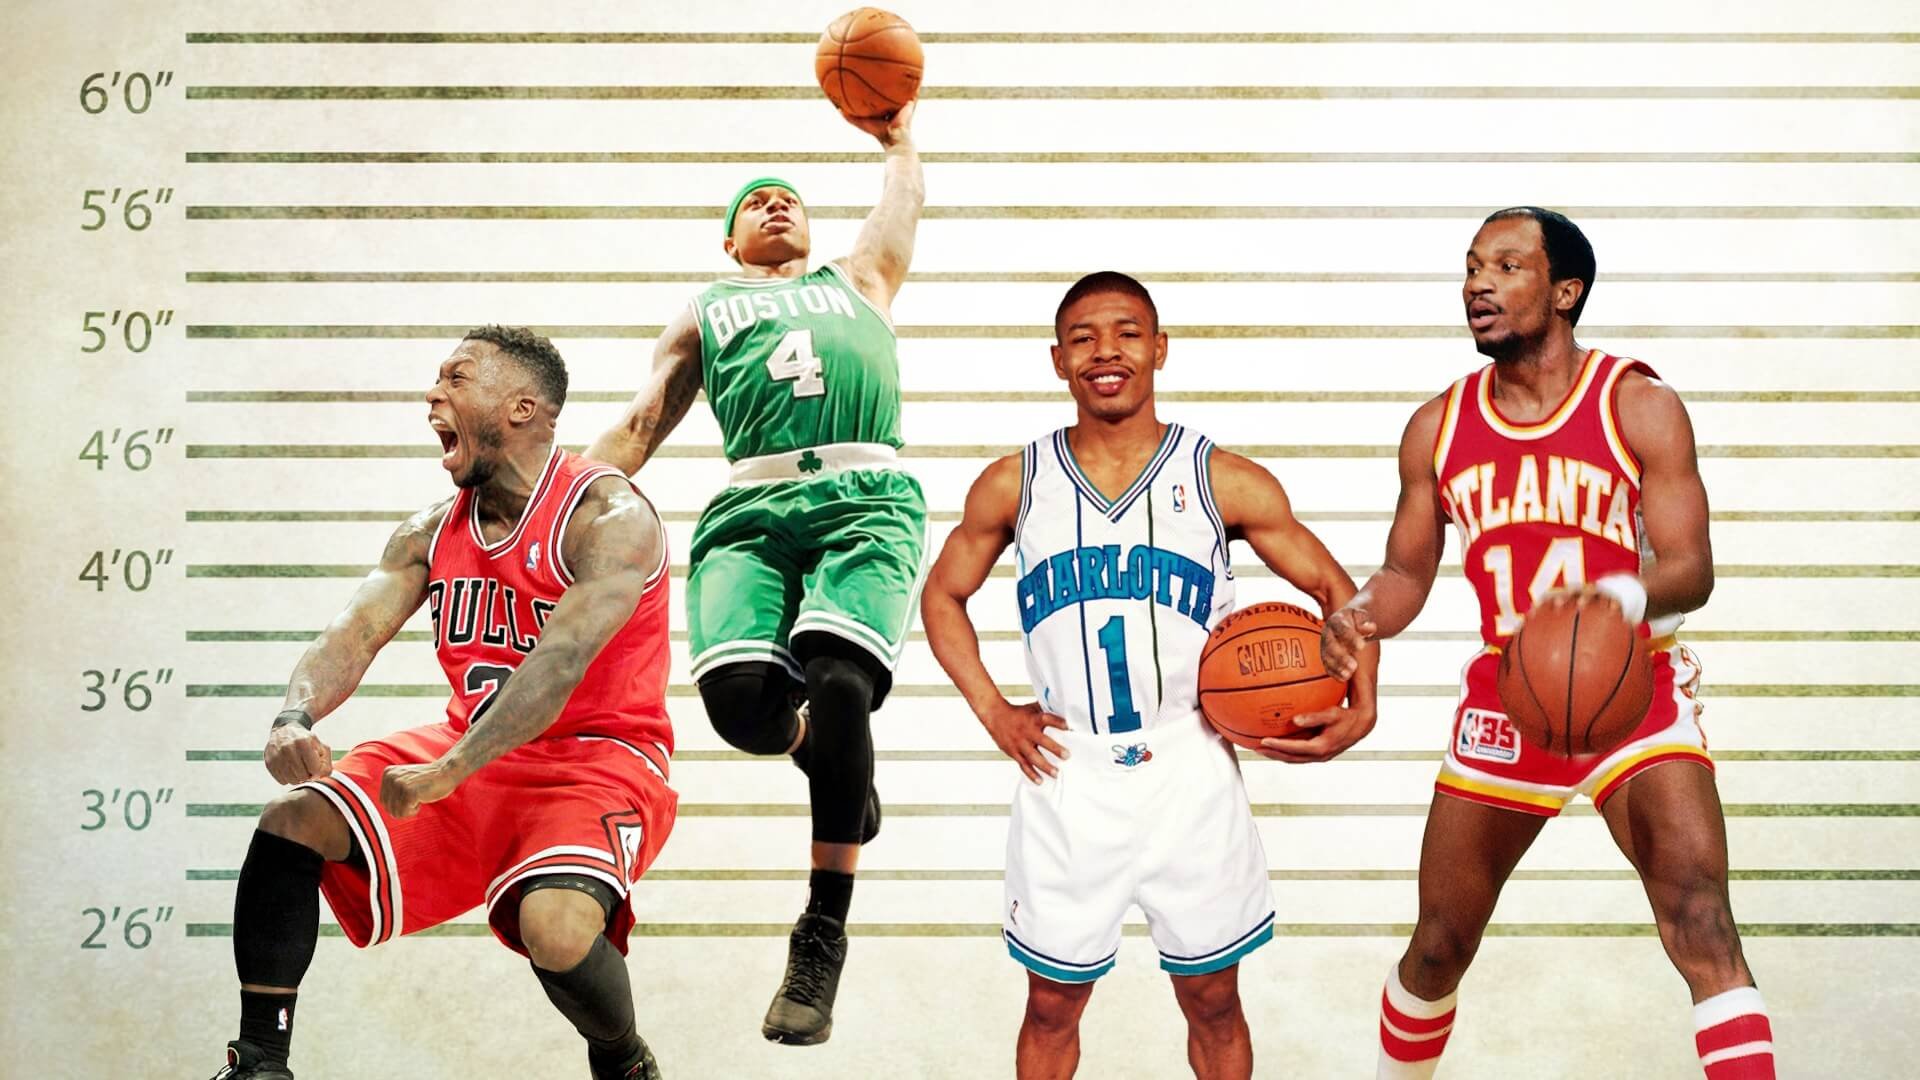 How to Find the Best Deals on Basketball Shorts This Year: An Amazon Shopping Guide